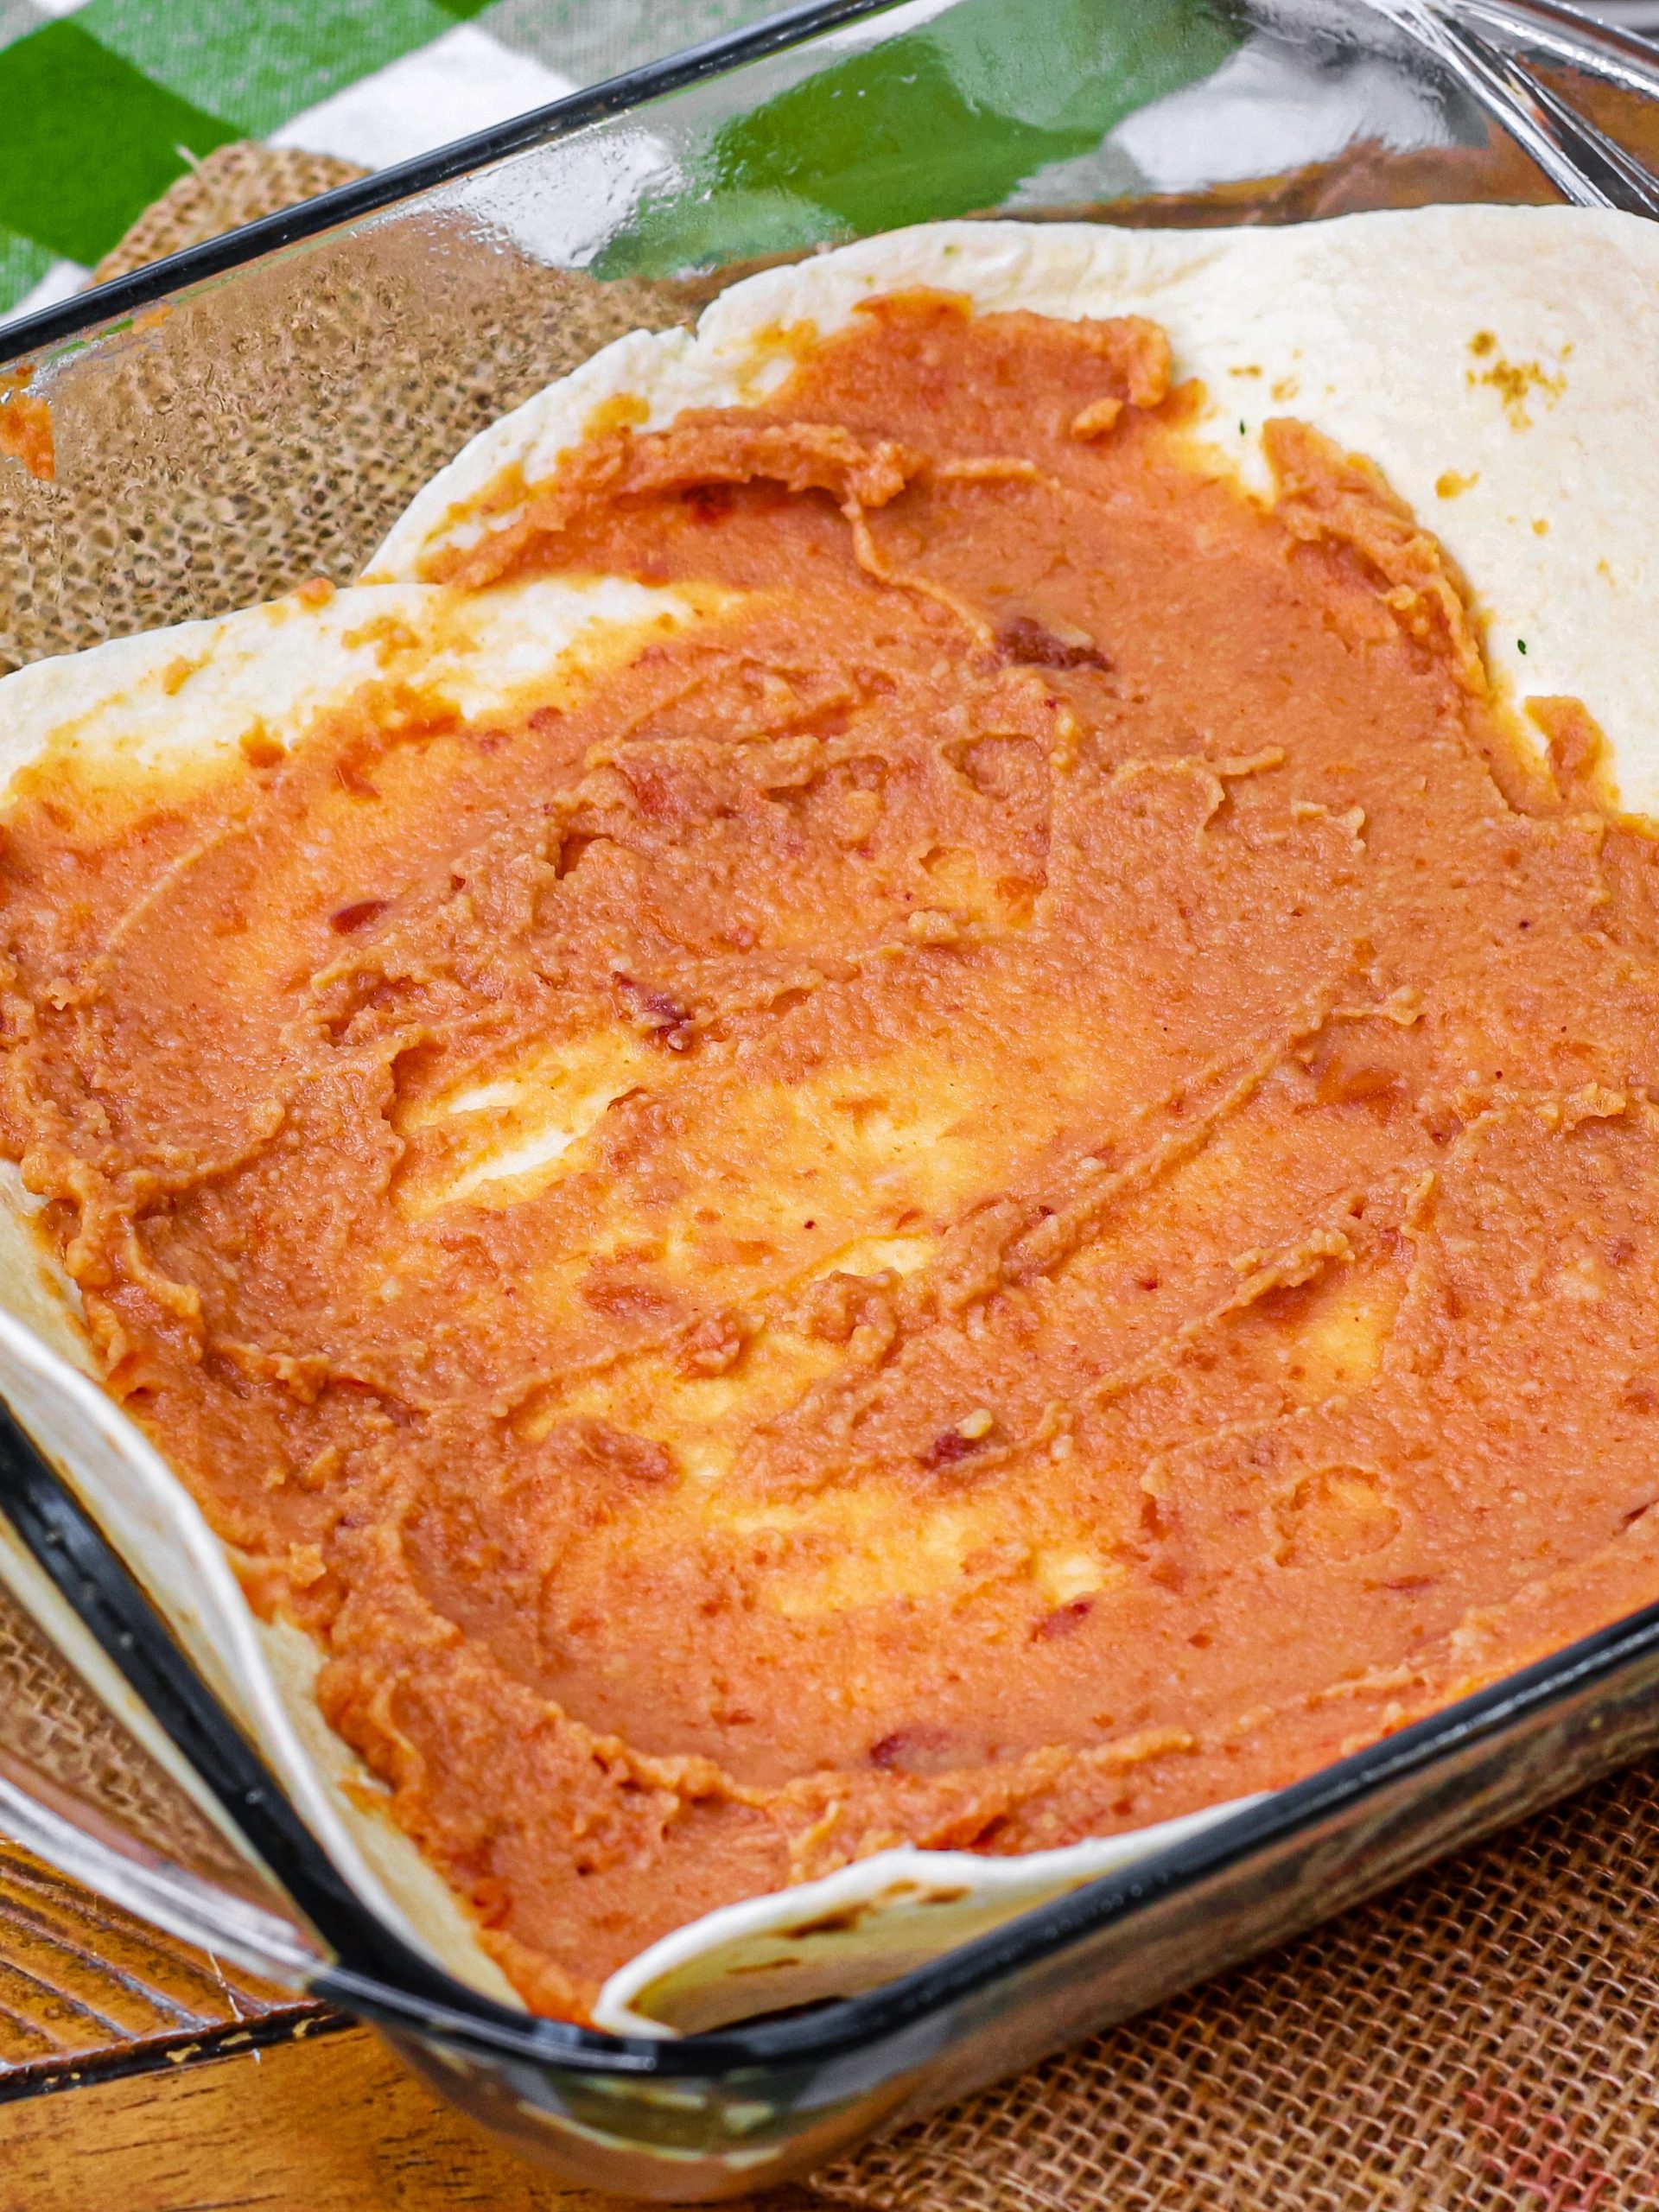 Spread 1/3 of the refried beans on it, 1/3 of the meat, and ⅓ of the cheddar cheese.